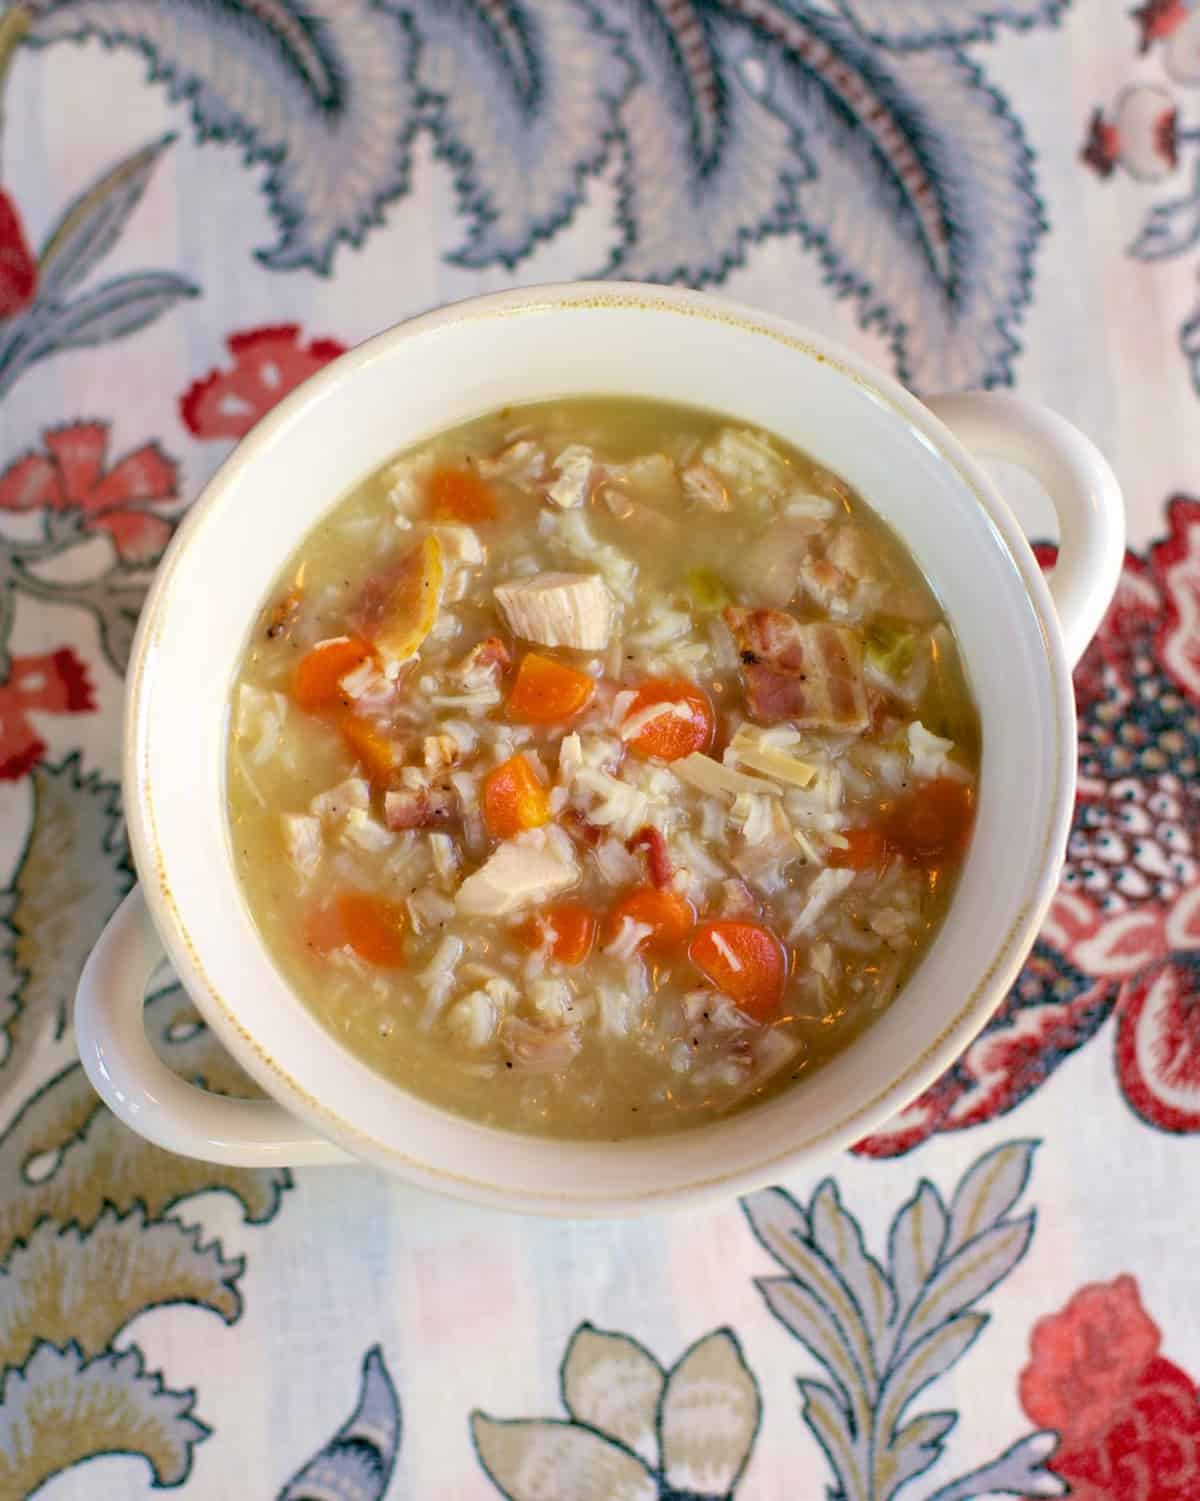 Chicken, Bacon & Rice Soup recipe - chicken broth, water, rice, cream of celery soup, carrots, bacon and chicken - use a rotisserie chicken and this soup is ready in 20 minutes! Just dump everything in the pot, bring to a boil and simmer. So easy and super delicious! Can also use uncooked chicken breast and make in the slow cooker.